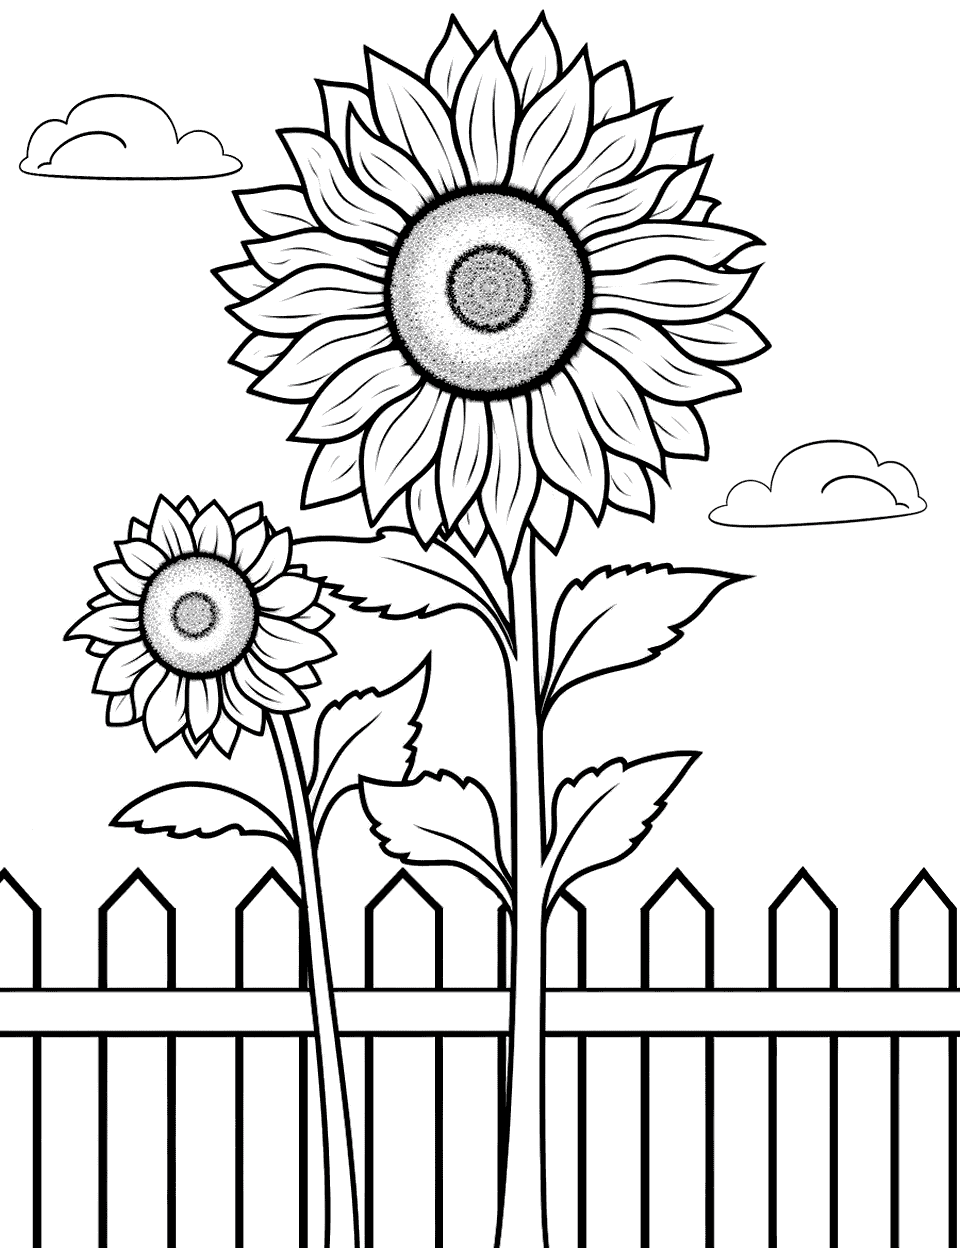 Sunflower and Picket Fence Coloring Page - A sunflowers growing beside a white picket fence.